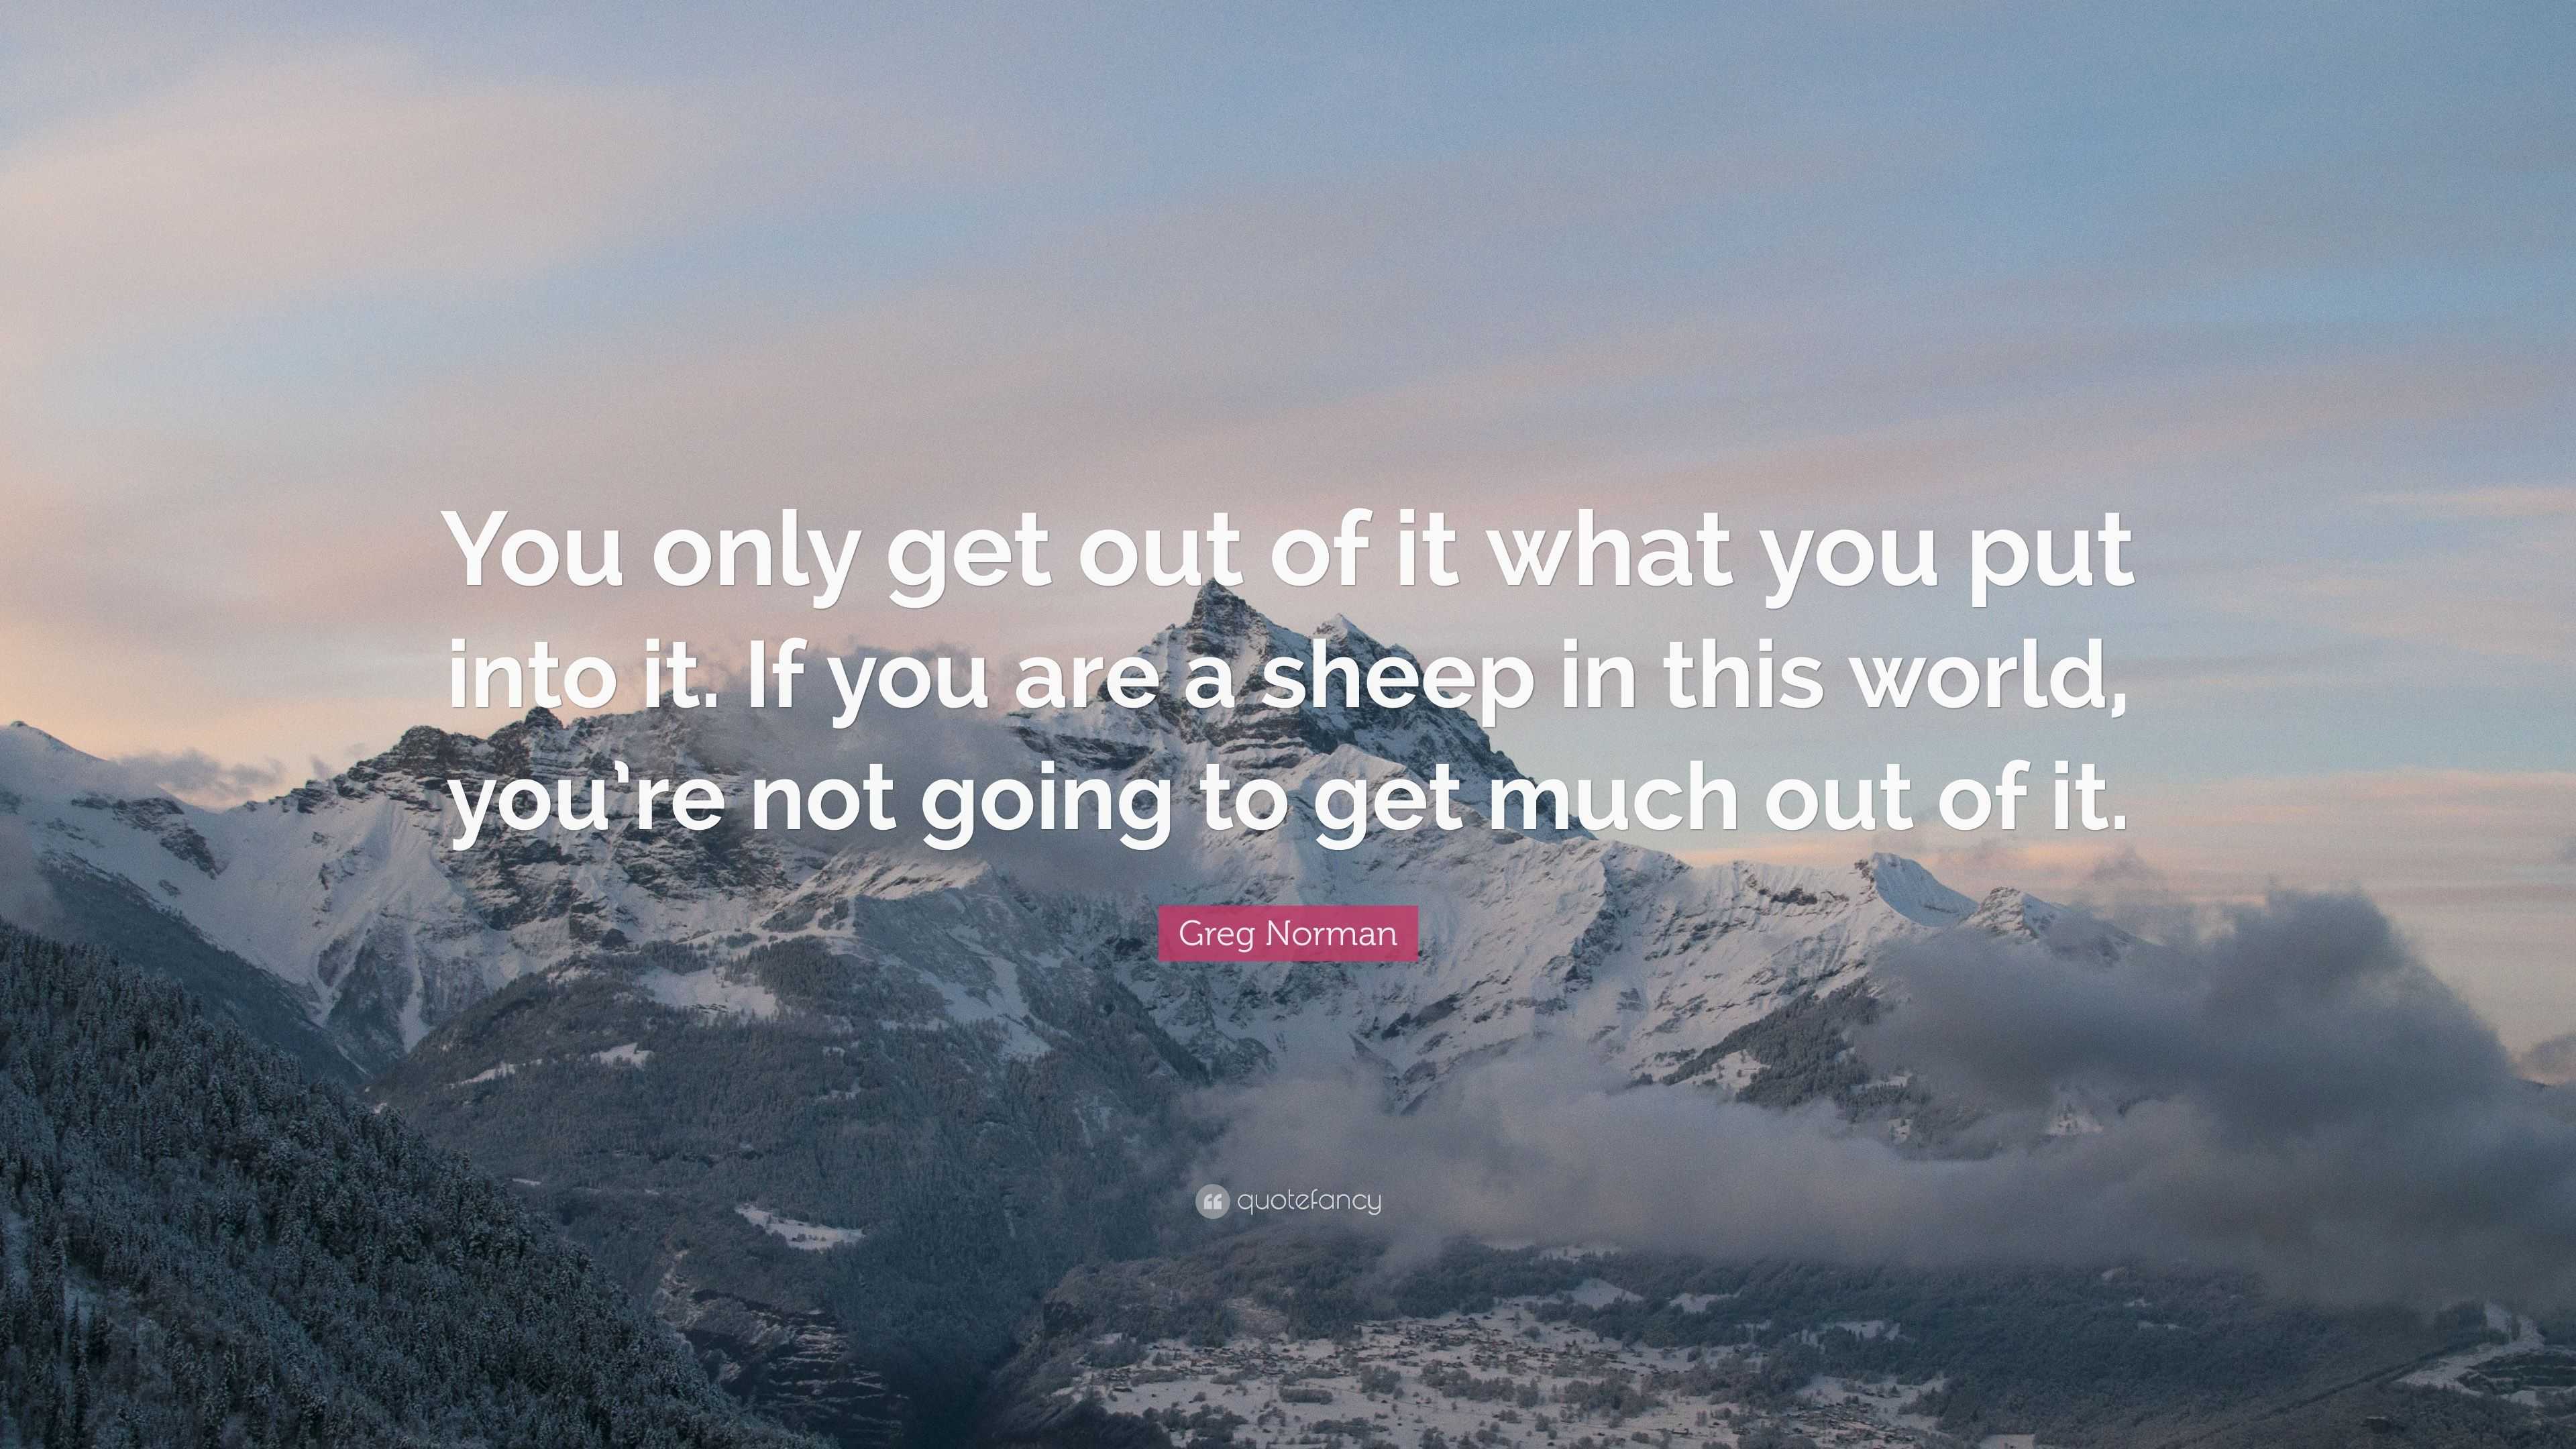 Greg Norman Quote You Only Get Out Of It What You Put Into It If You Are A Sheep In This World You Re Not Going To Get Much Out Of It 7